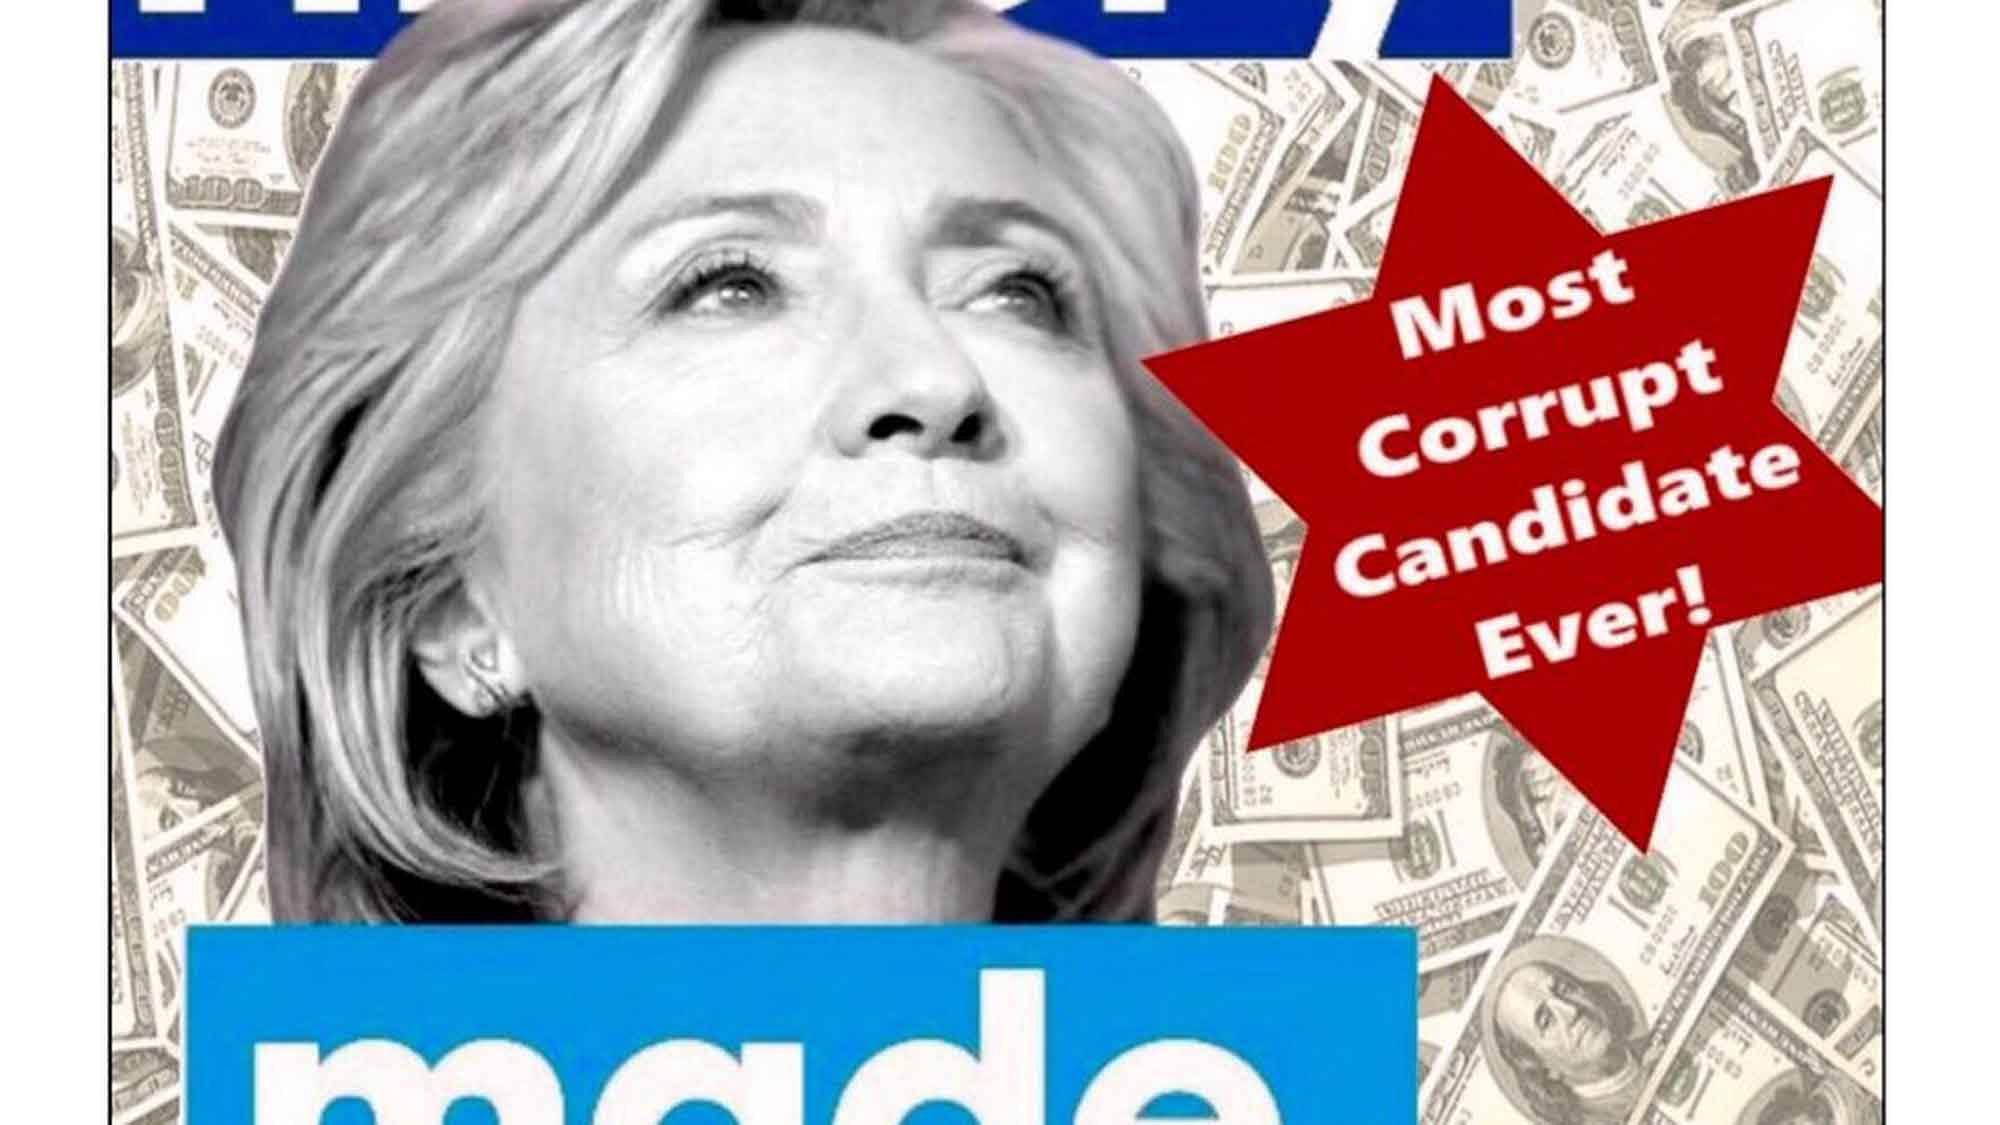 

Donald Trump on Saturday tweeted “Crooked Hillary - Makes History,” along with an infamous meme. (Photo Courtesy: <a href="https://twitter.com/BraddJaffy?ref_src=twsrc%5Etfw">Twitter/BraddJaffy</a>)